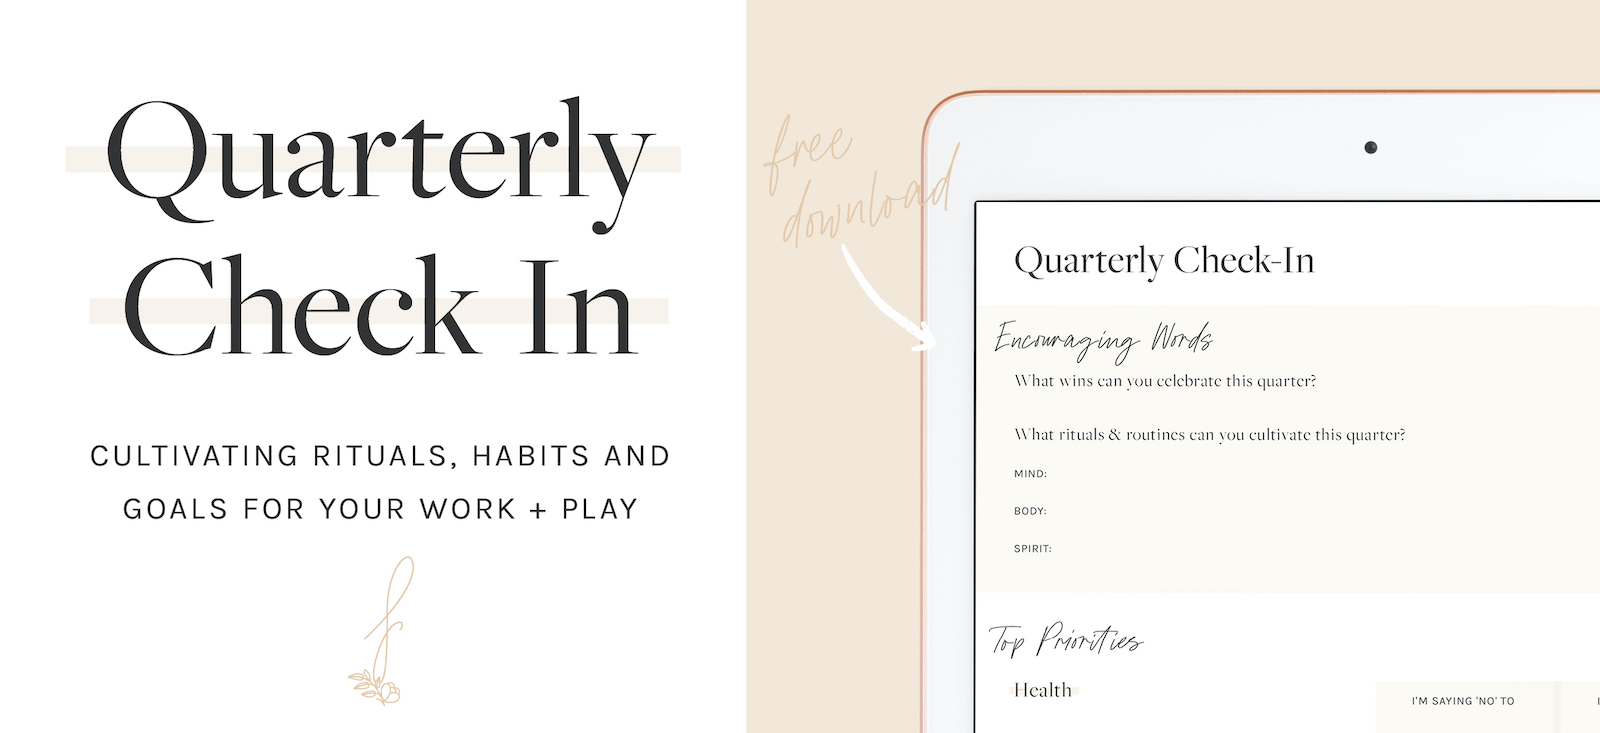 Quarter_1_Check_in_Cultivating_Rituals_Goals_and_Daily_Joys_Flourish_Caroline_Potter_NTP